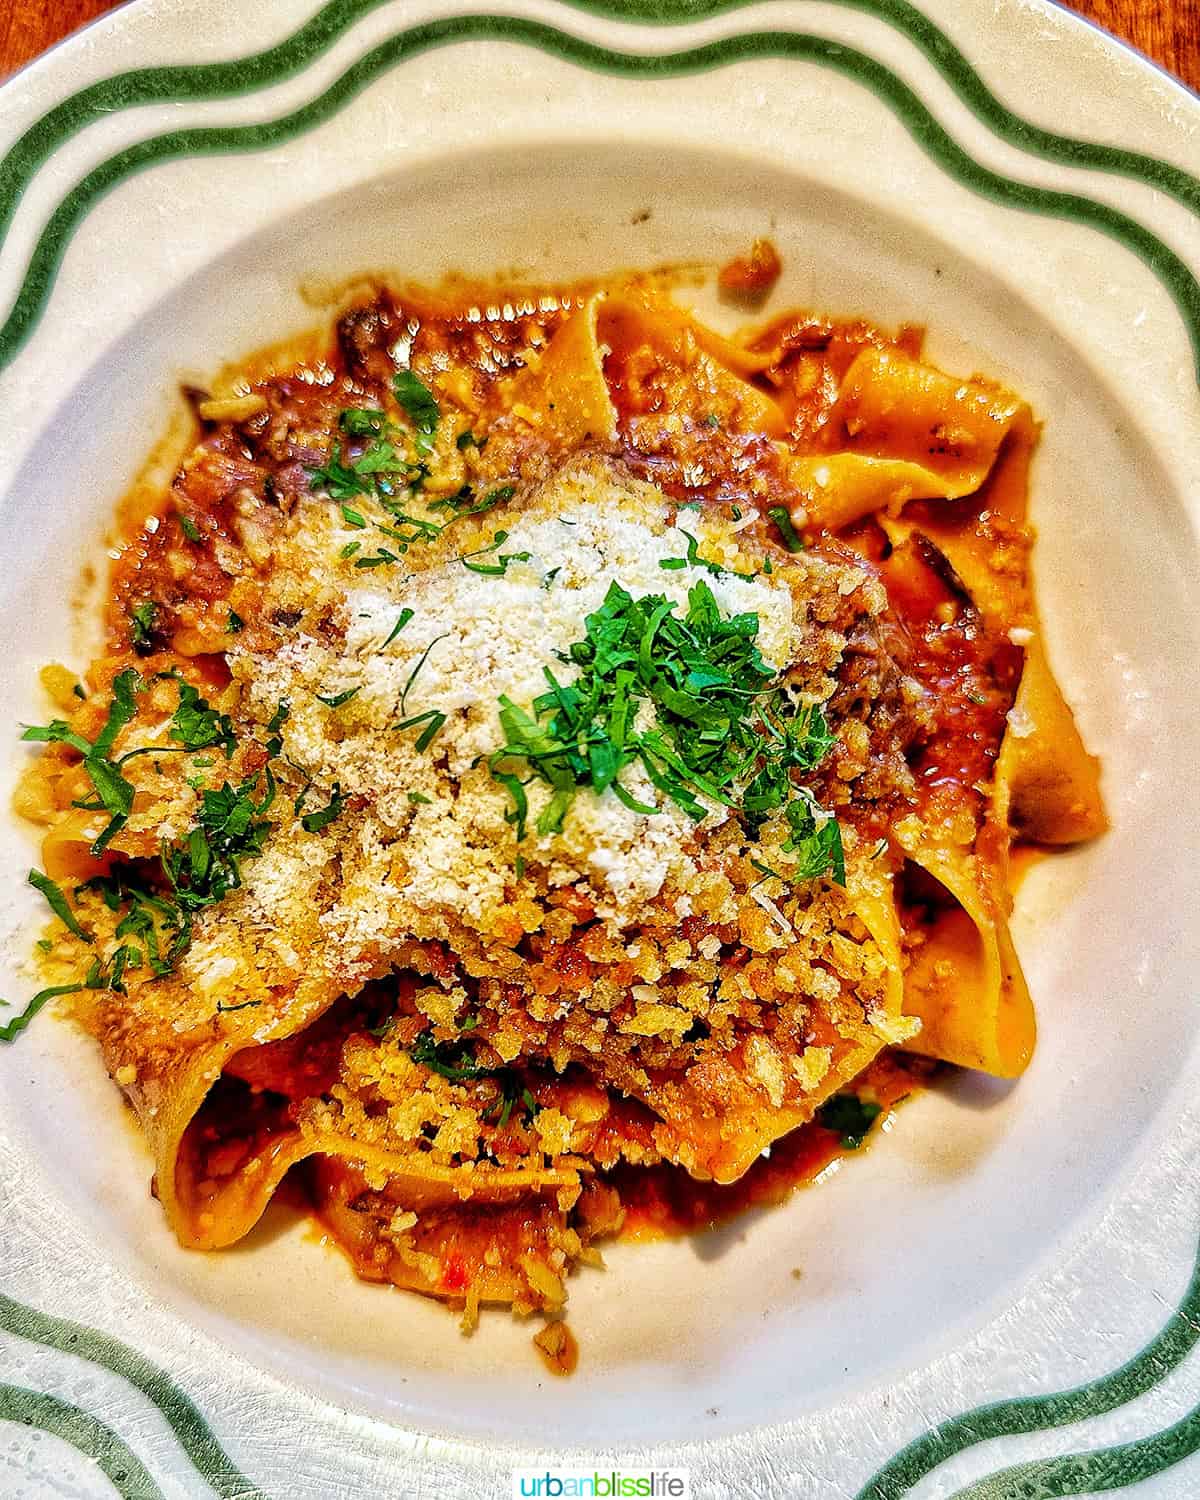 bowl of pappardelle with wild board ragu at Bad Roman restaurant in New York City.